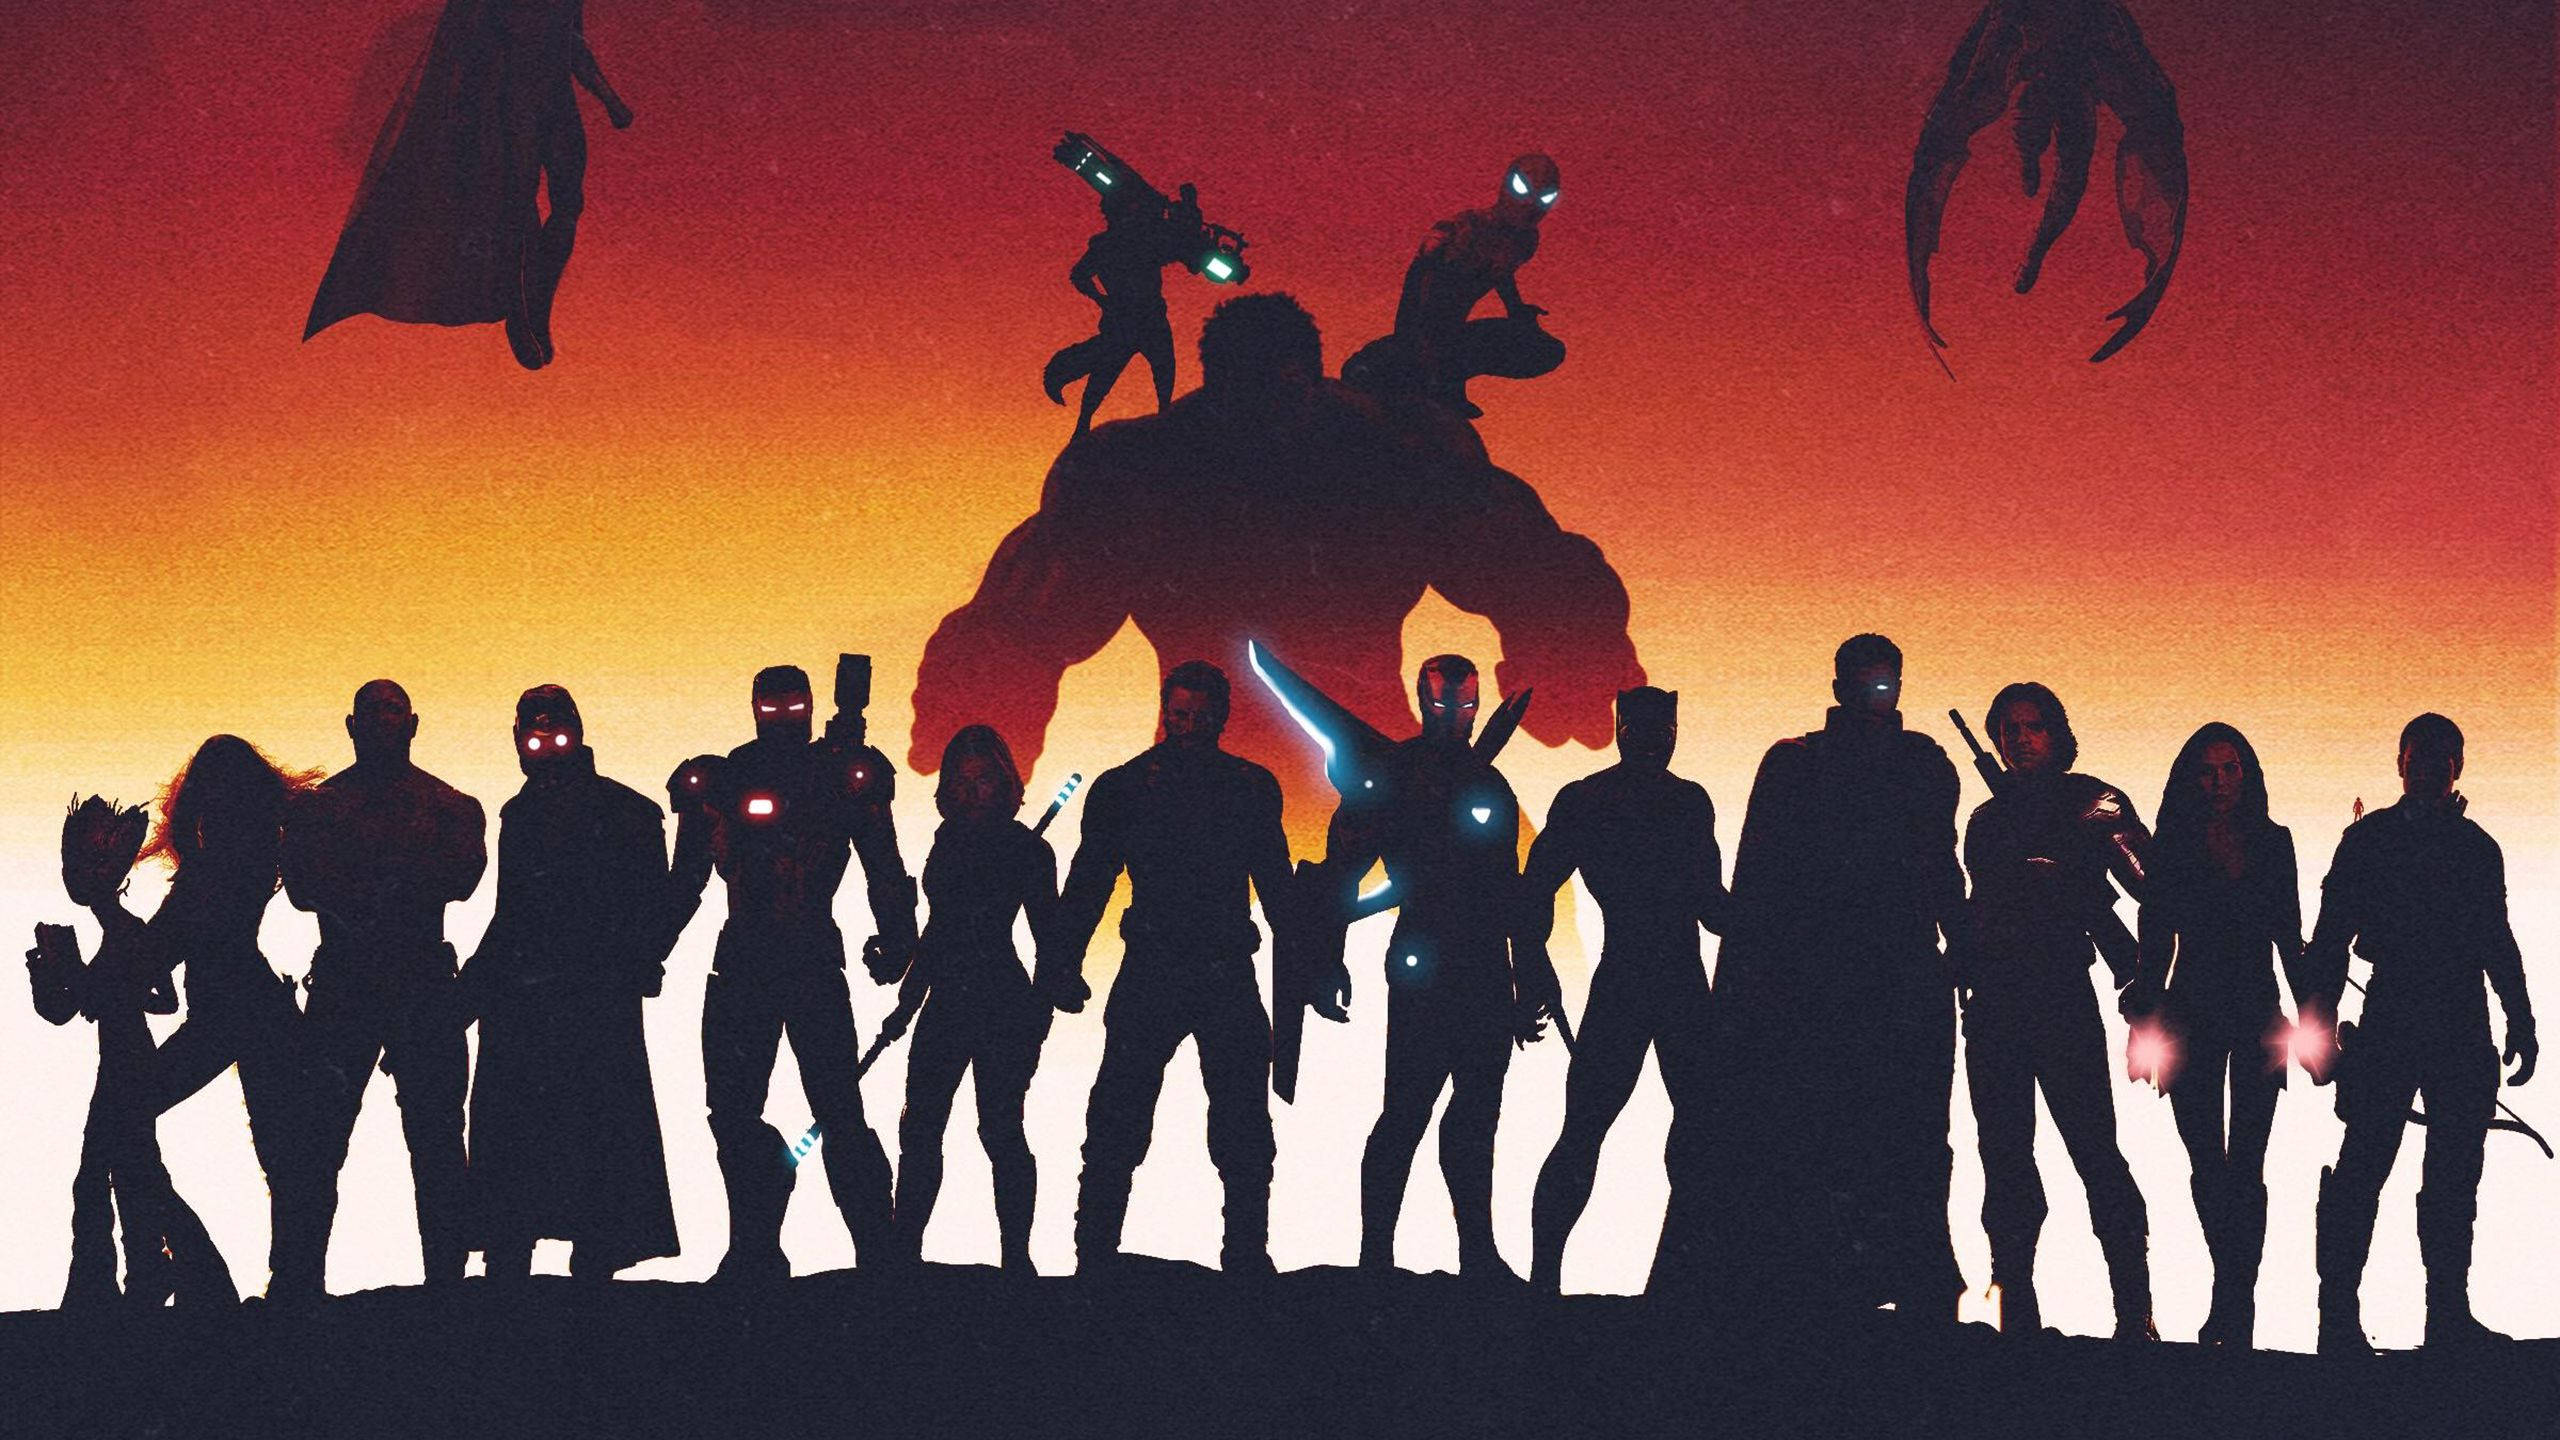 2560x1440 Marvel Heroes Silhouettes